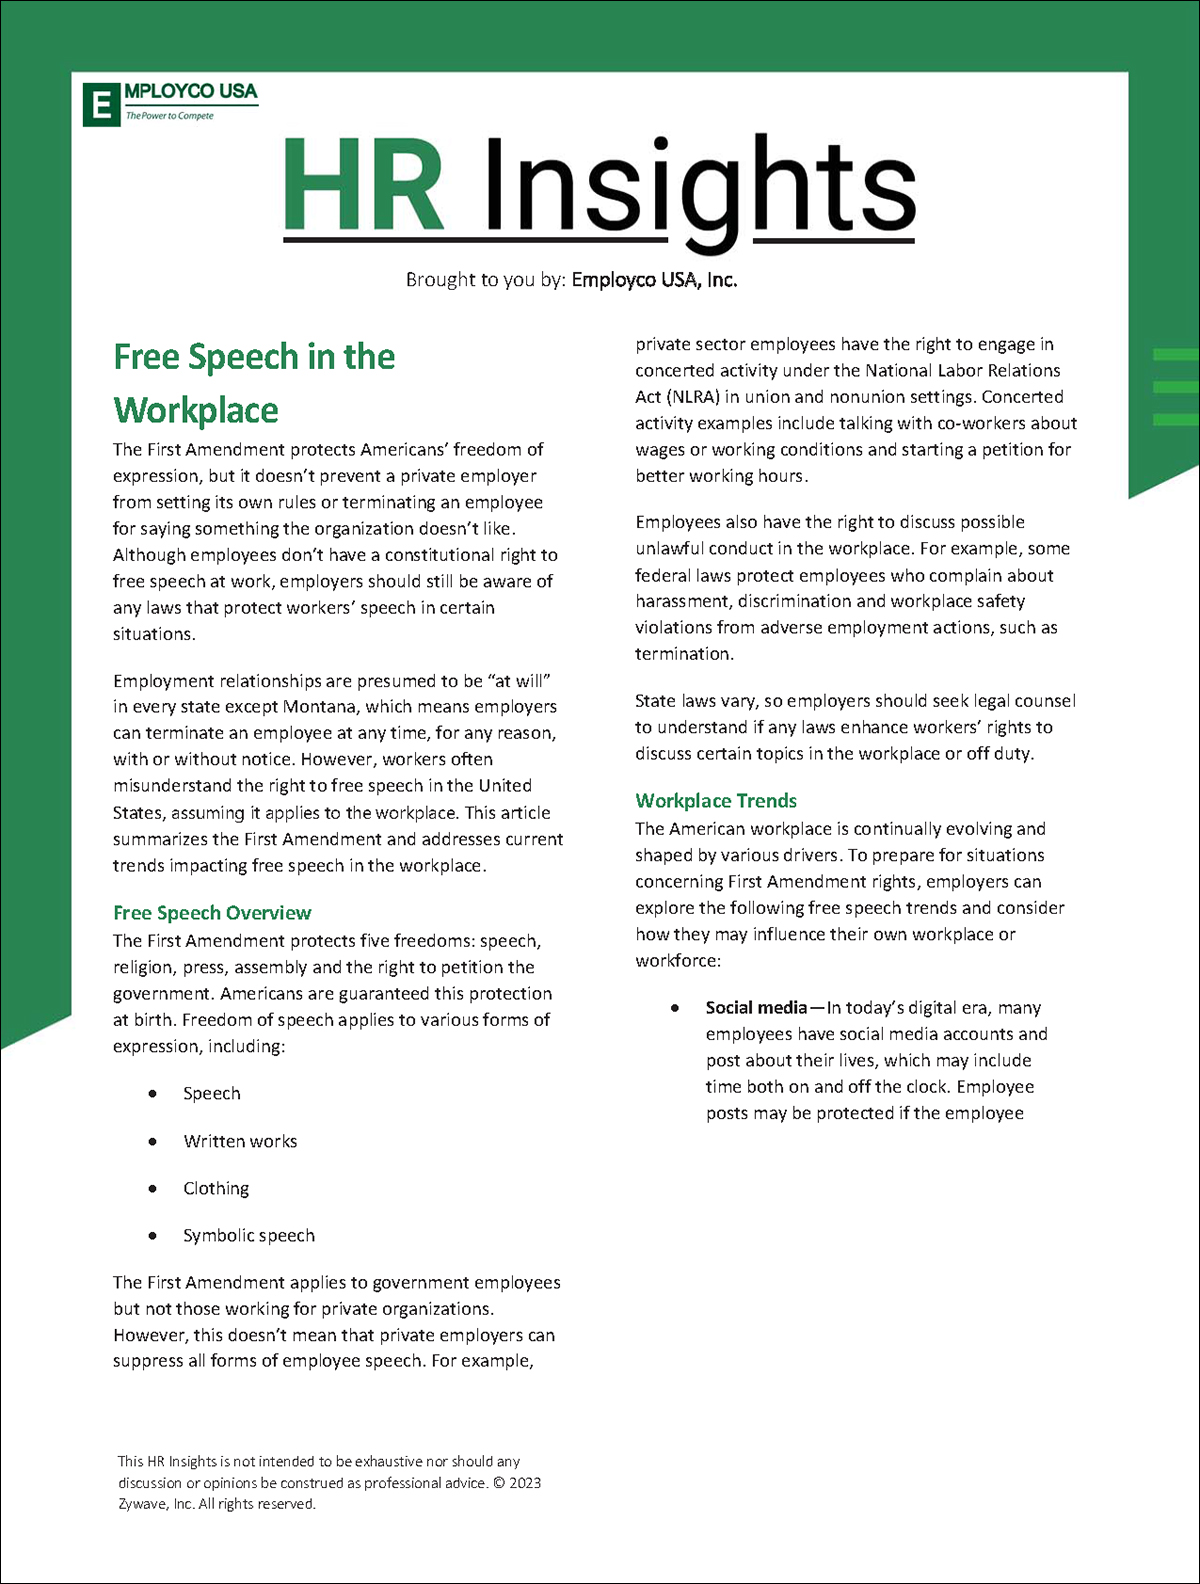 HR Insights: Free Speech in the Workplace